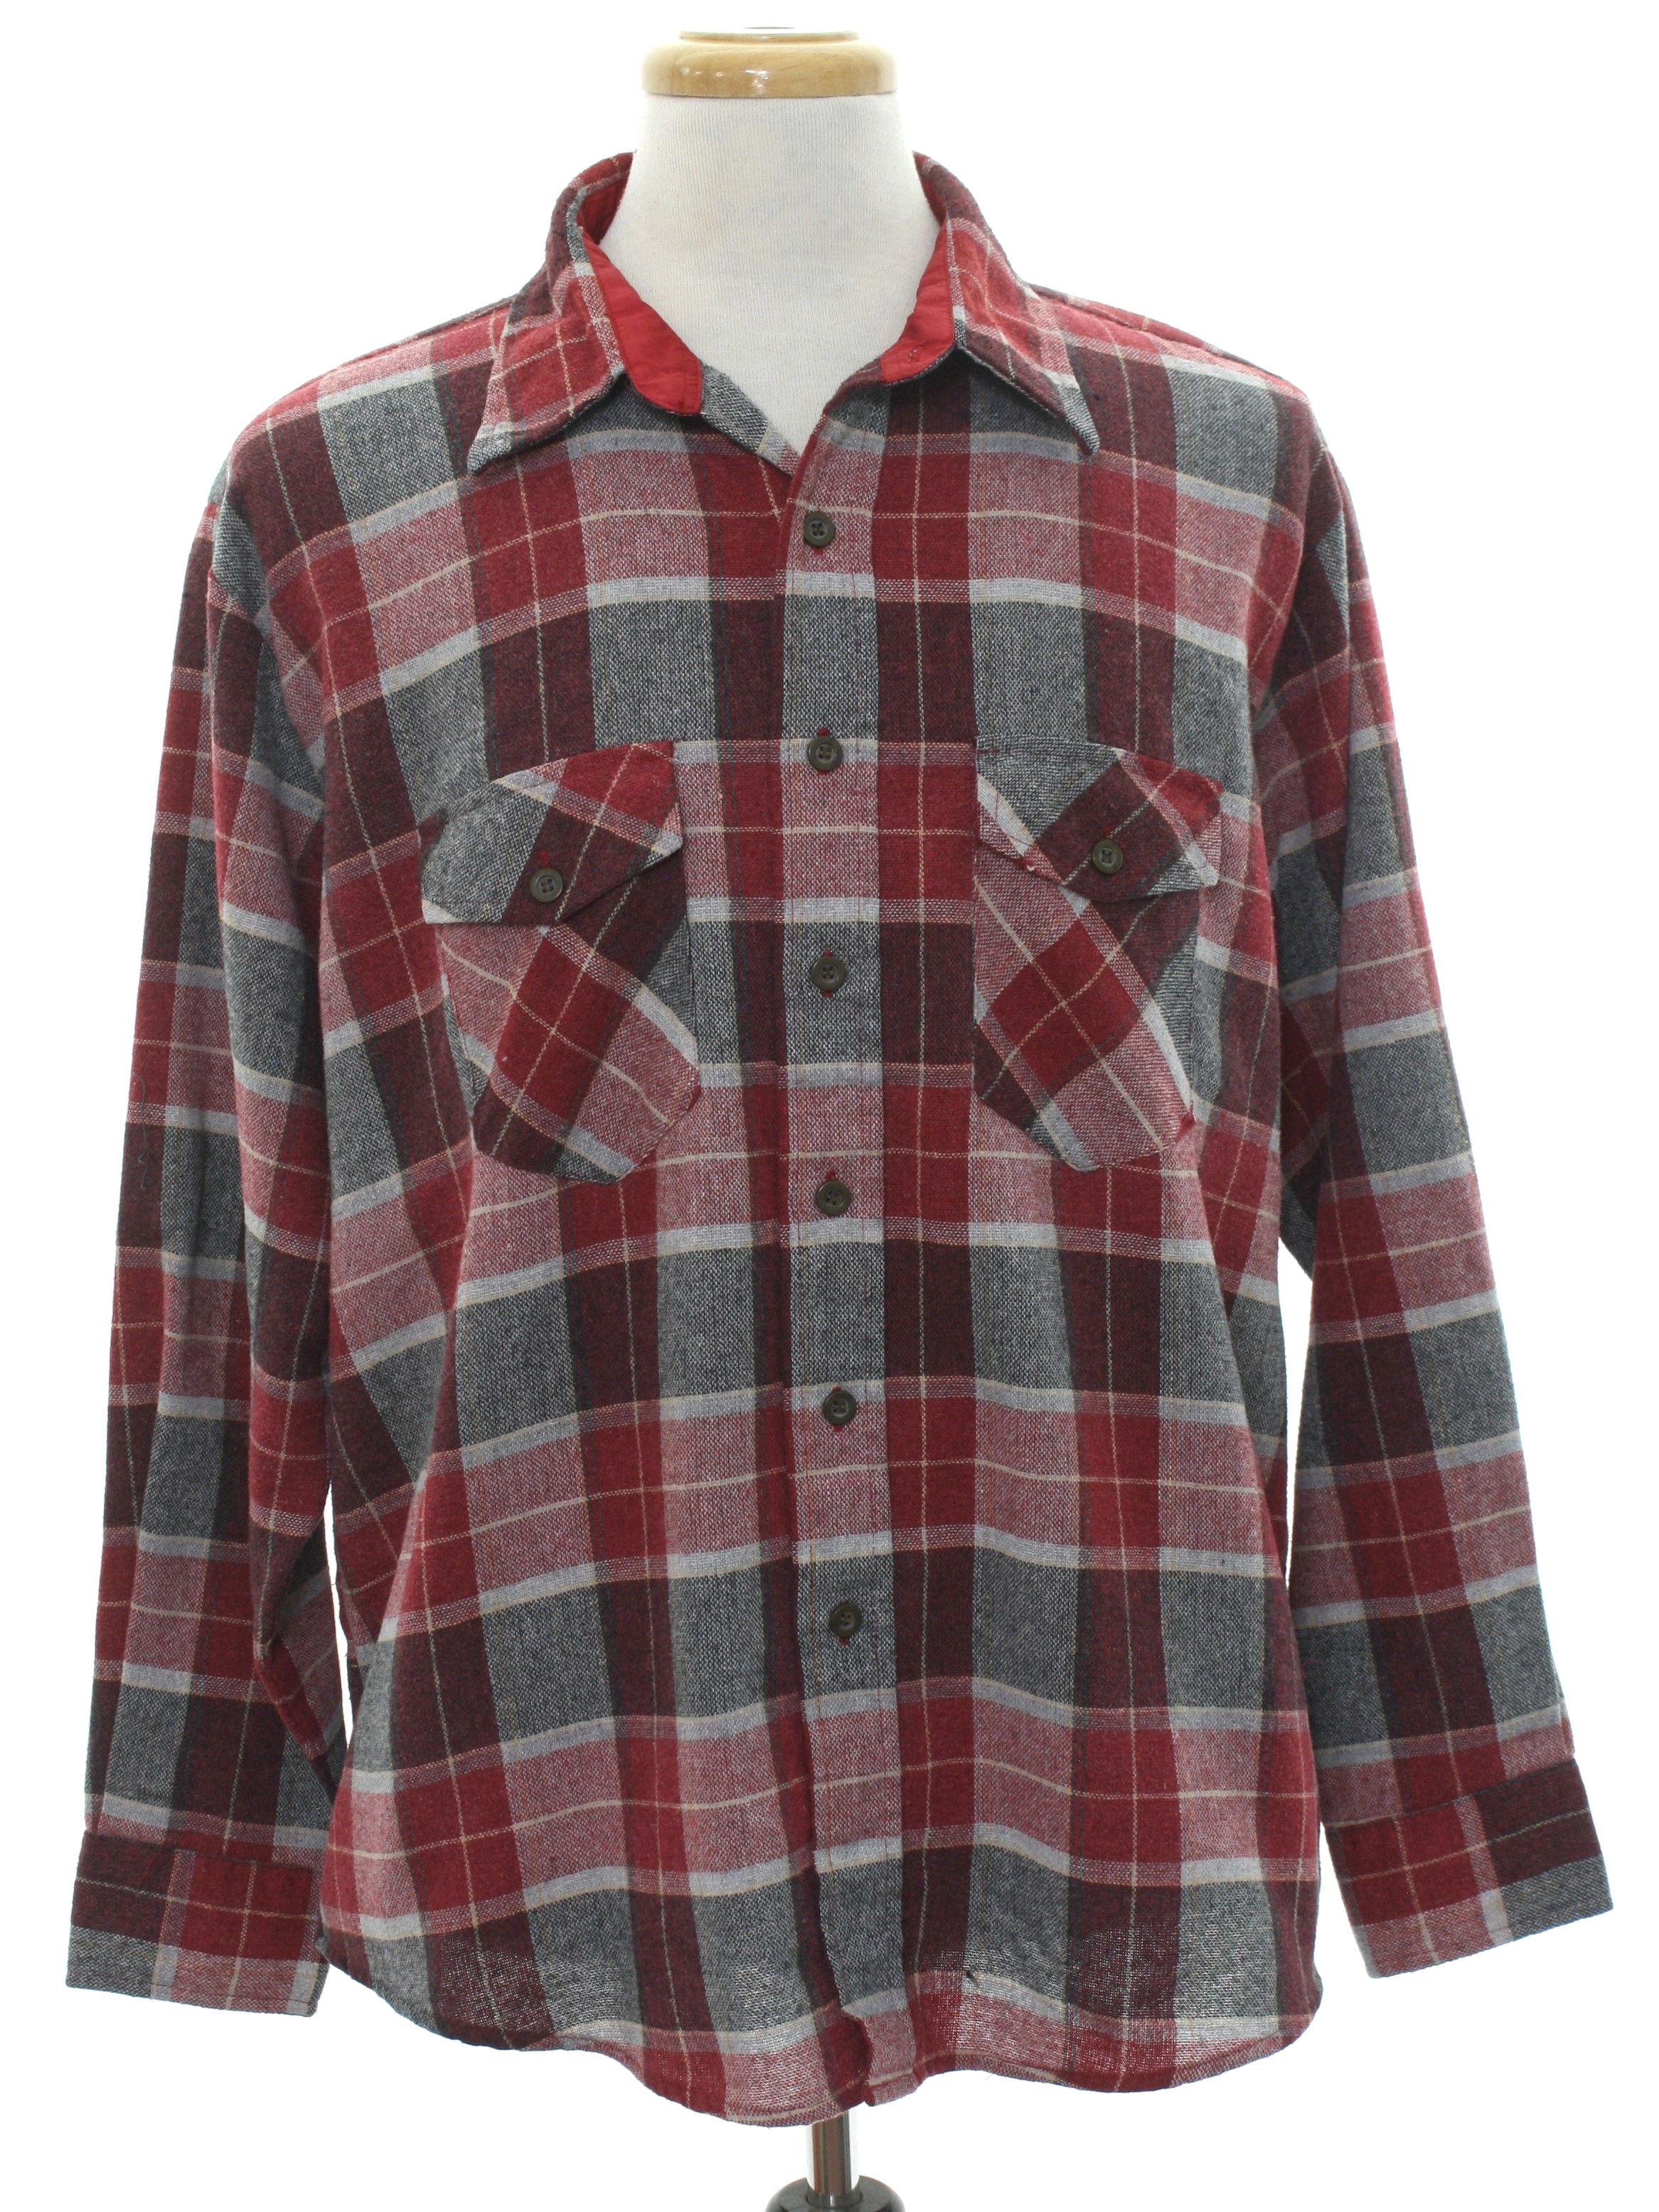 Vintage 1990's Wool Shirt: 90s -Oakton Ltd- Mens muted reds, greys and ...